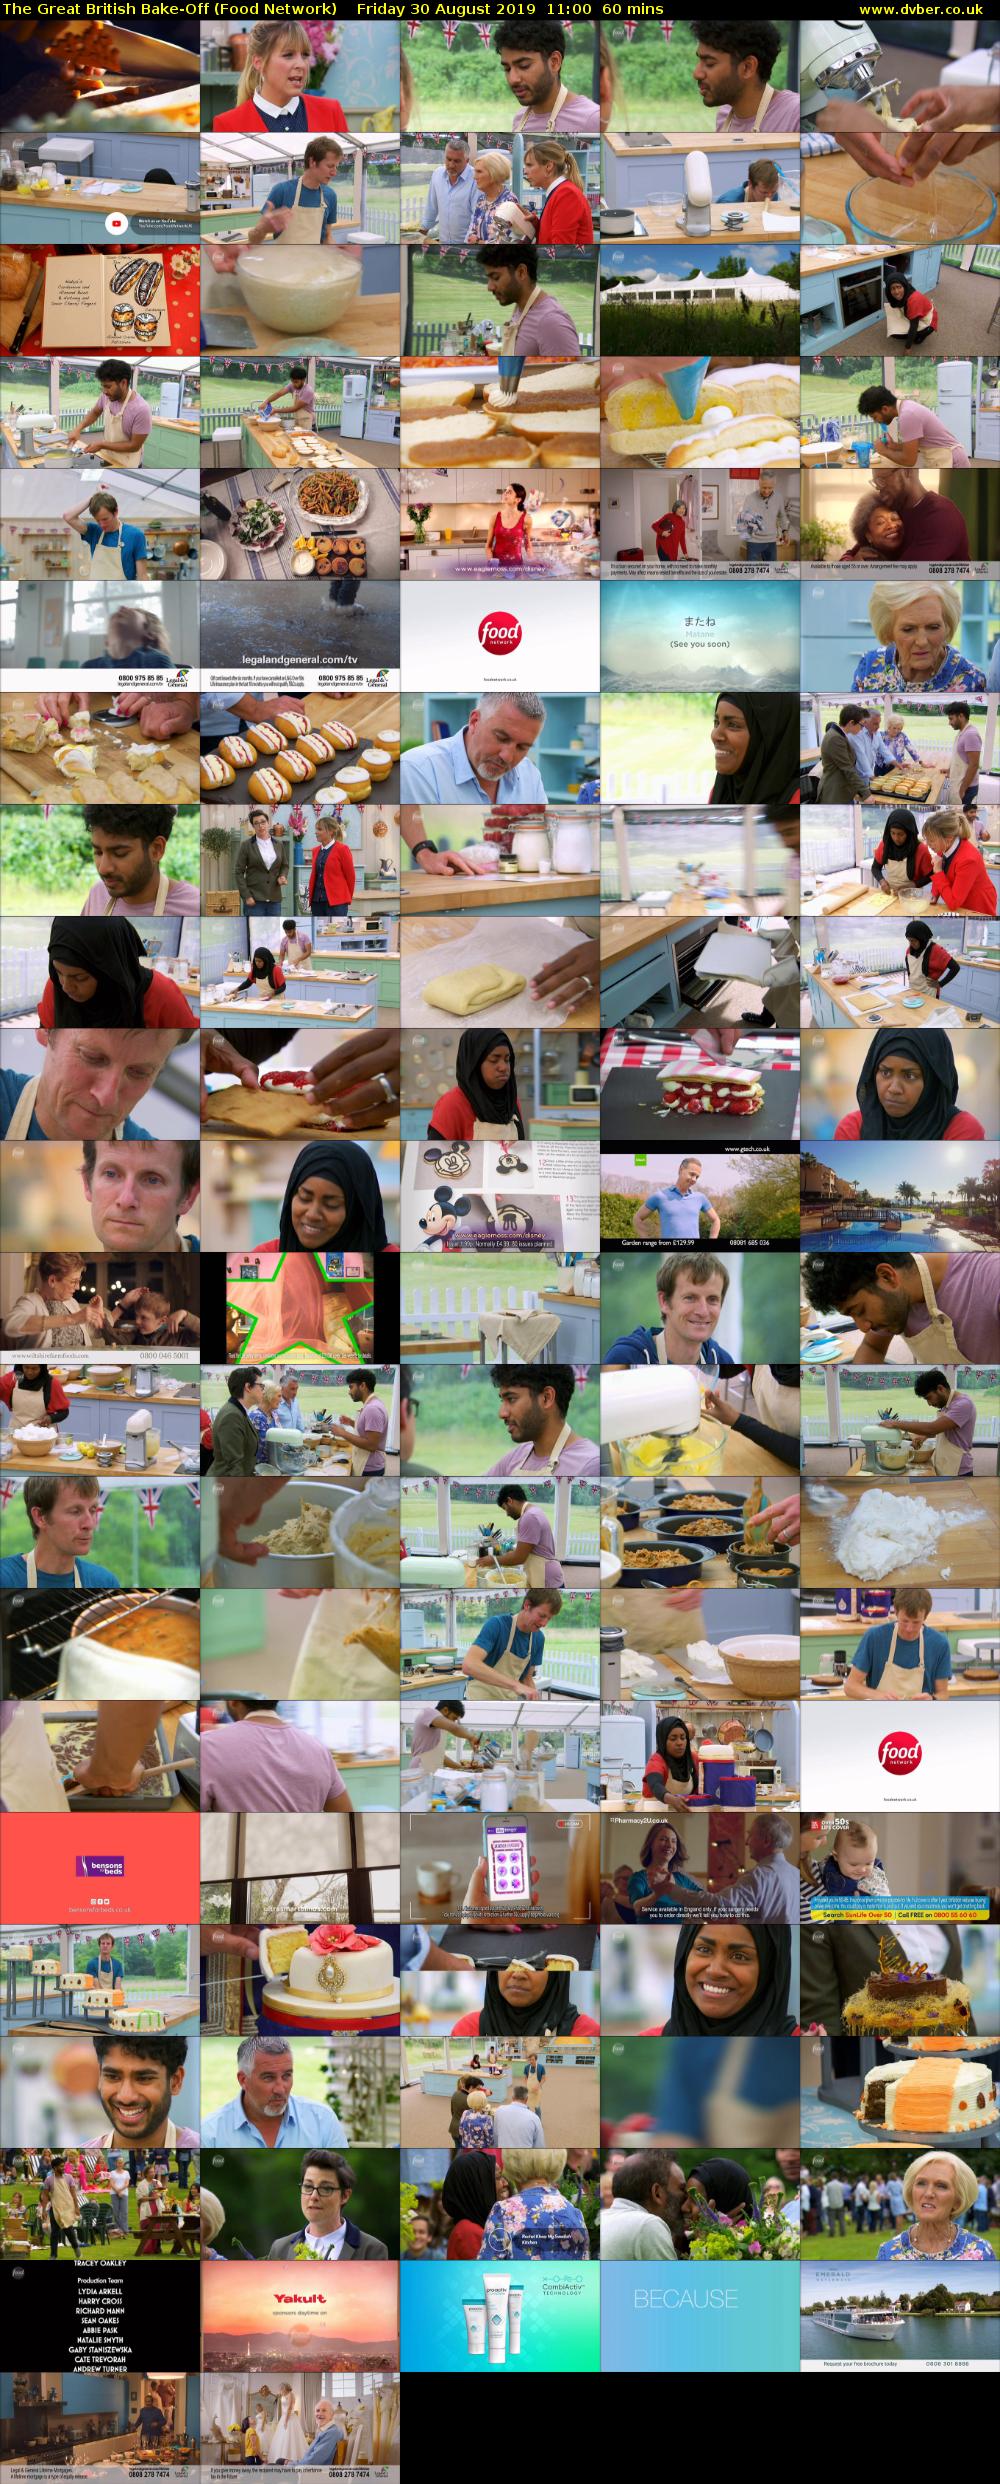 The Great British Bake-Off (Food Network) Friday 30 August 2019 11:00 - 12:00